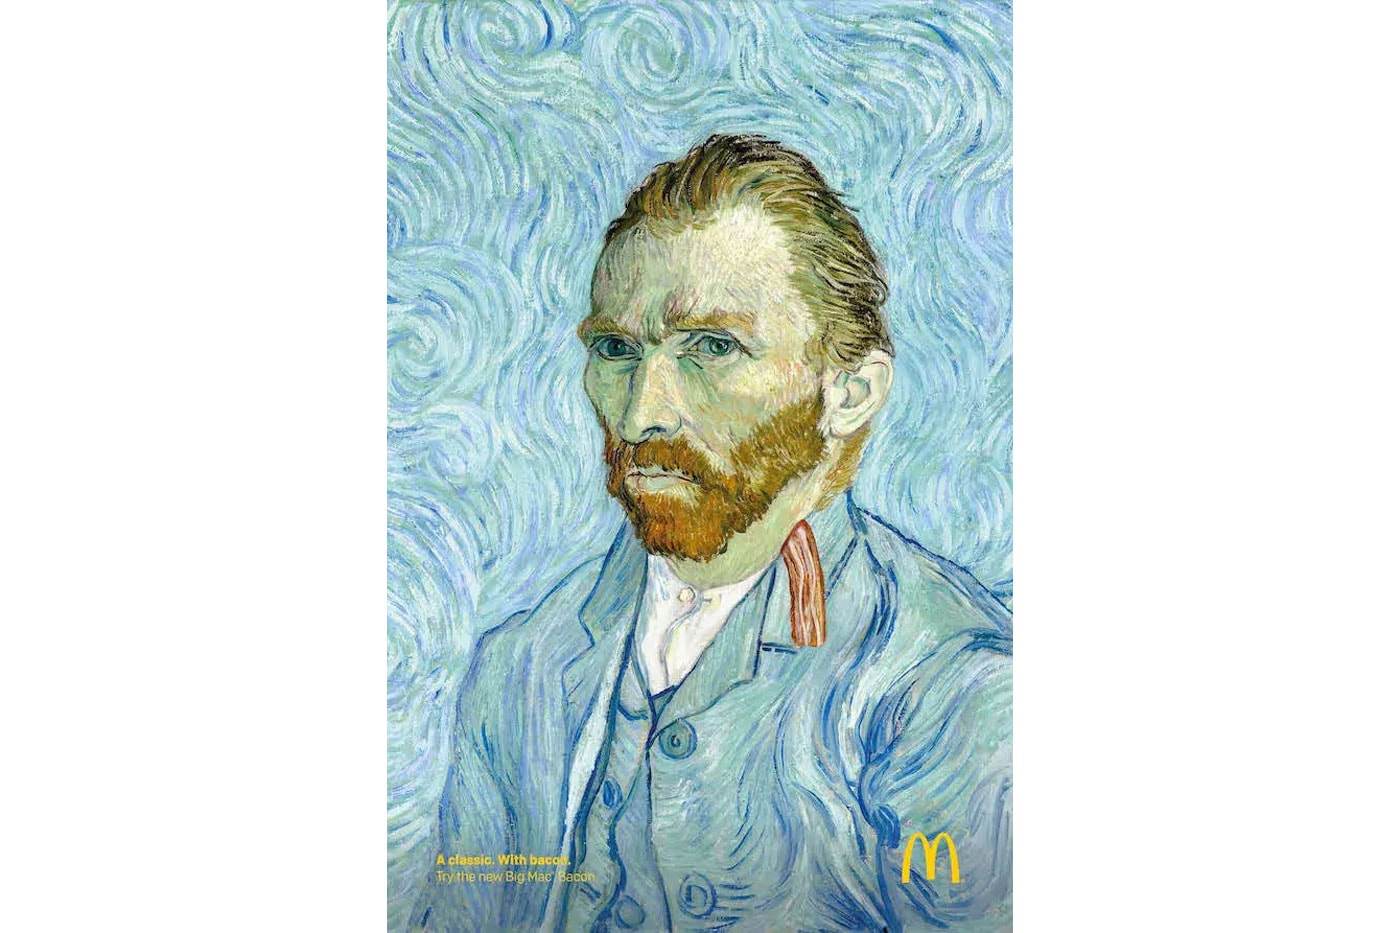 McDonald's Meant to be Classic Ad Campaign impressionist painters van gogh renoir manet modern art fast food mcnuggets large coke images advertisement 